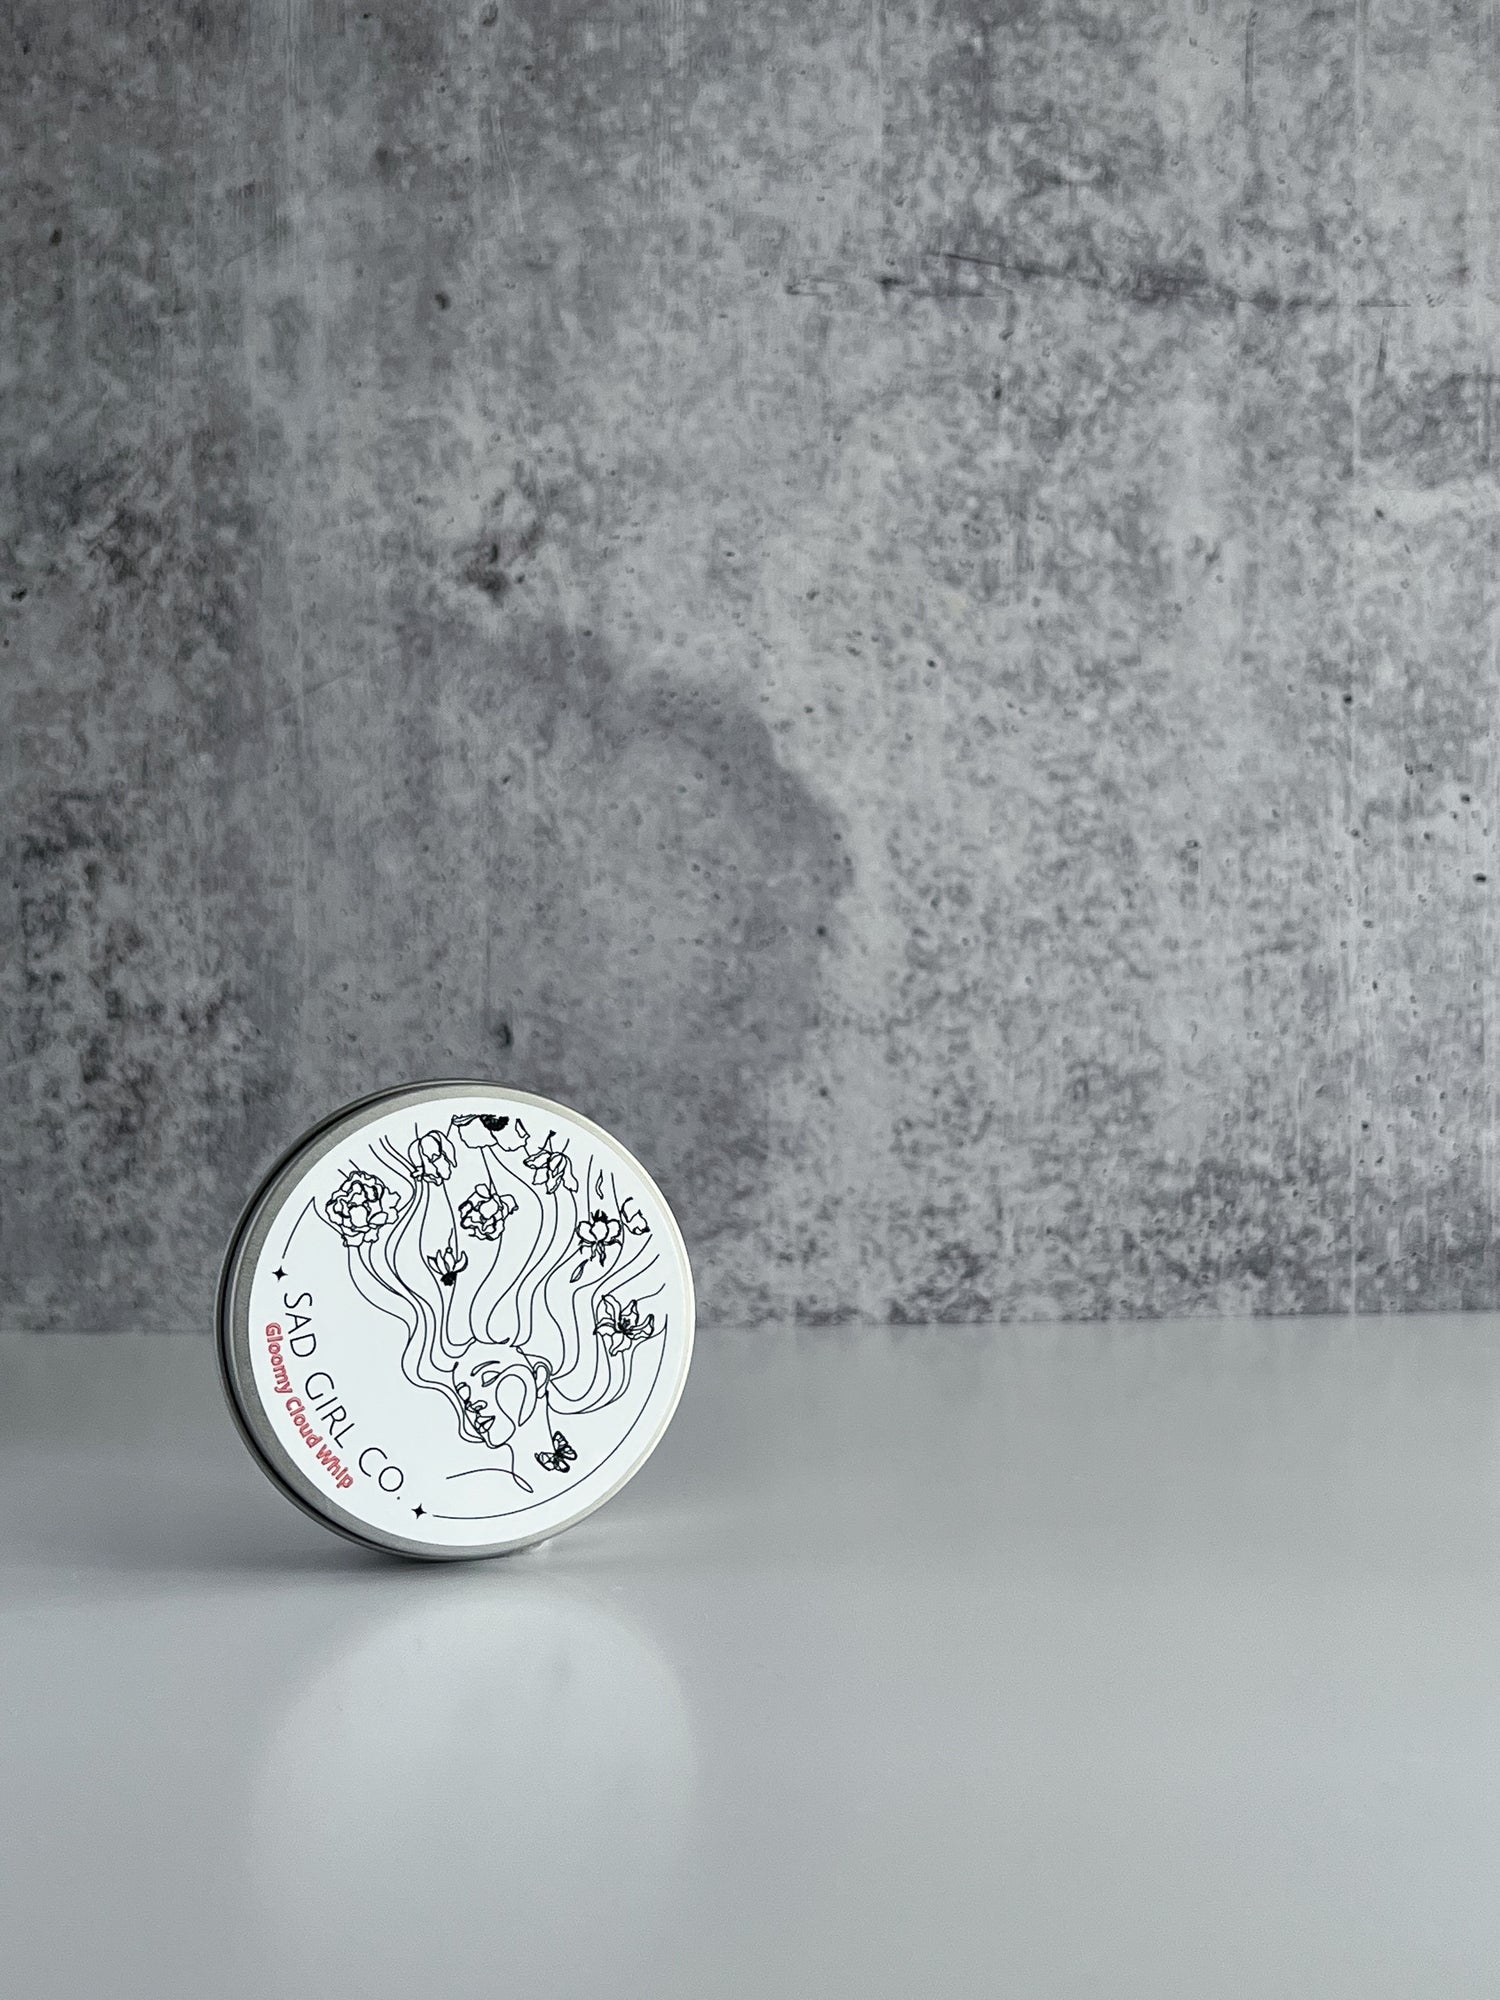 Silver tin sitting upright on a white surface with a cement background. Tin is labeled with Sad Girl Co. branding.